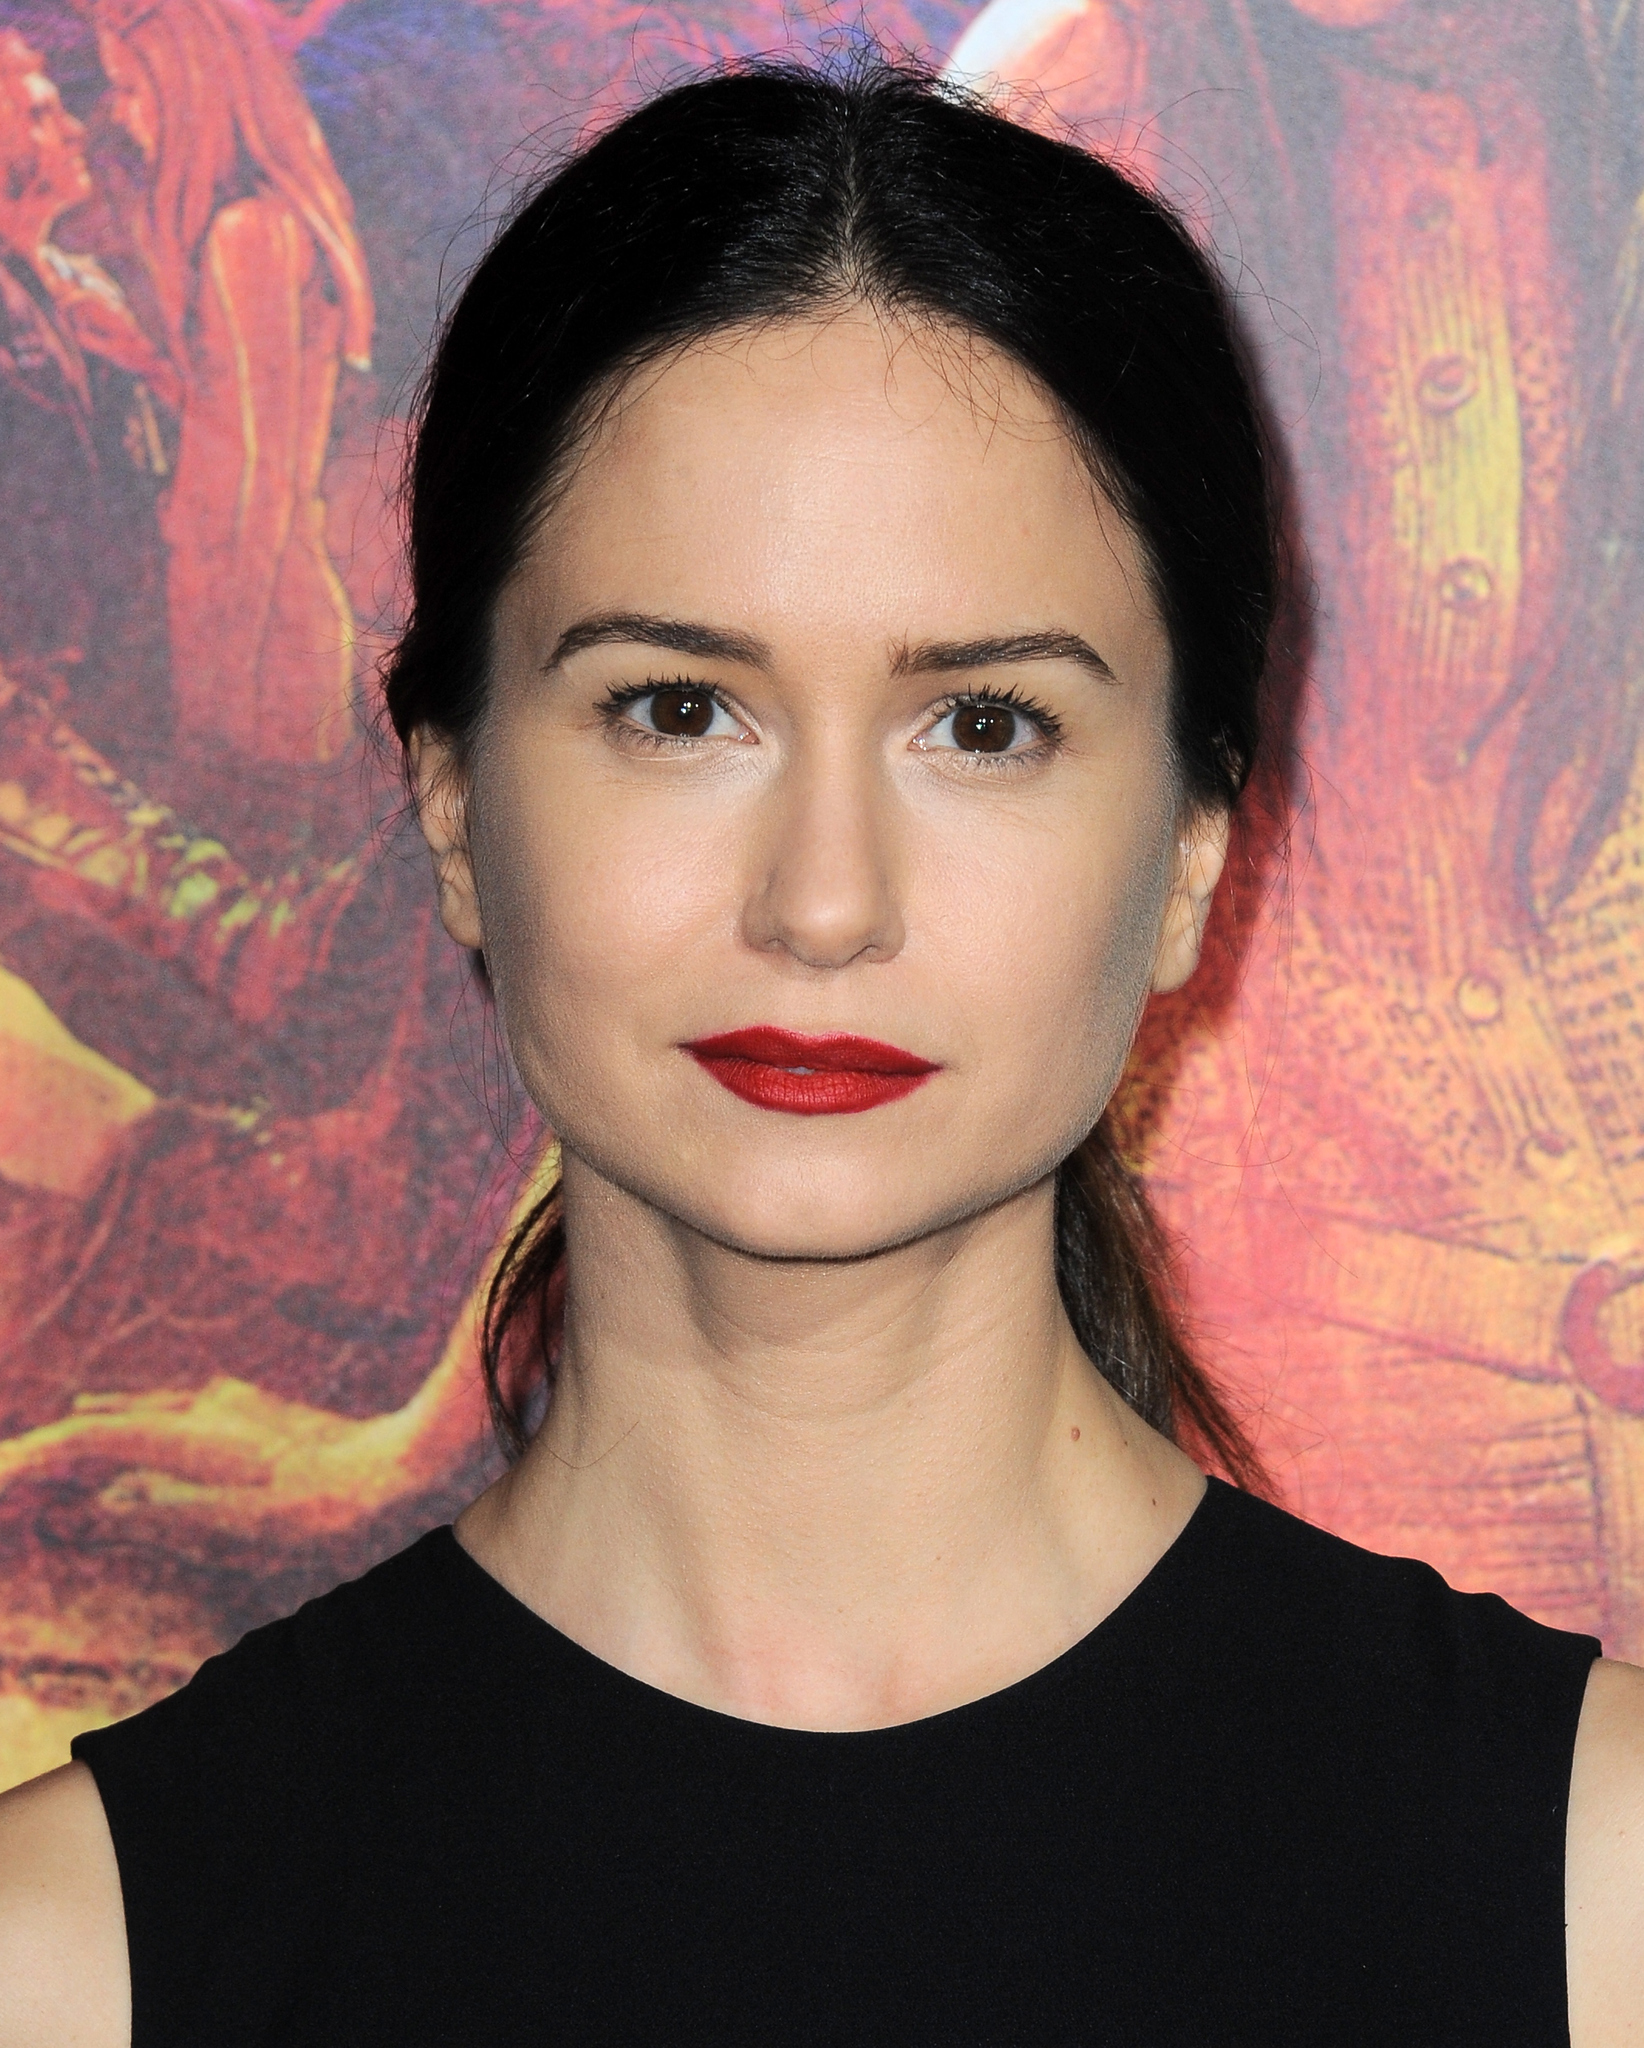 Katherine Waterston at event of Zmogiska silpnybe (2014)